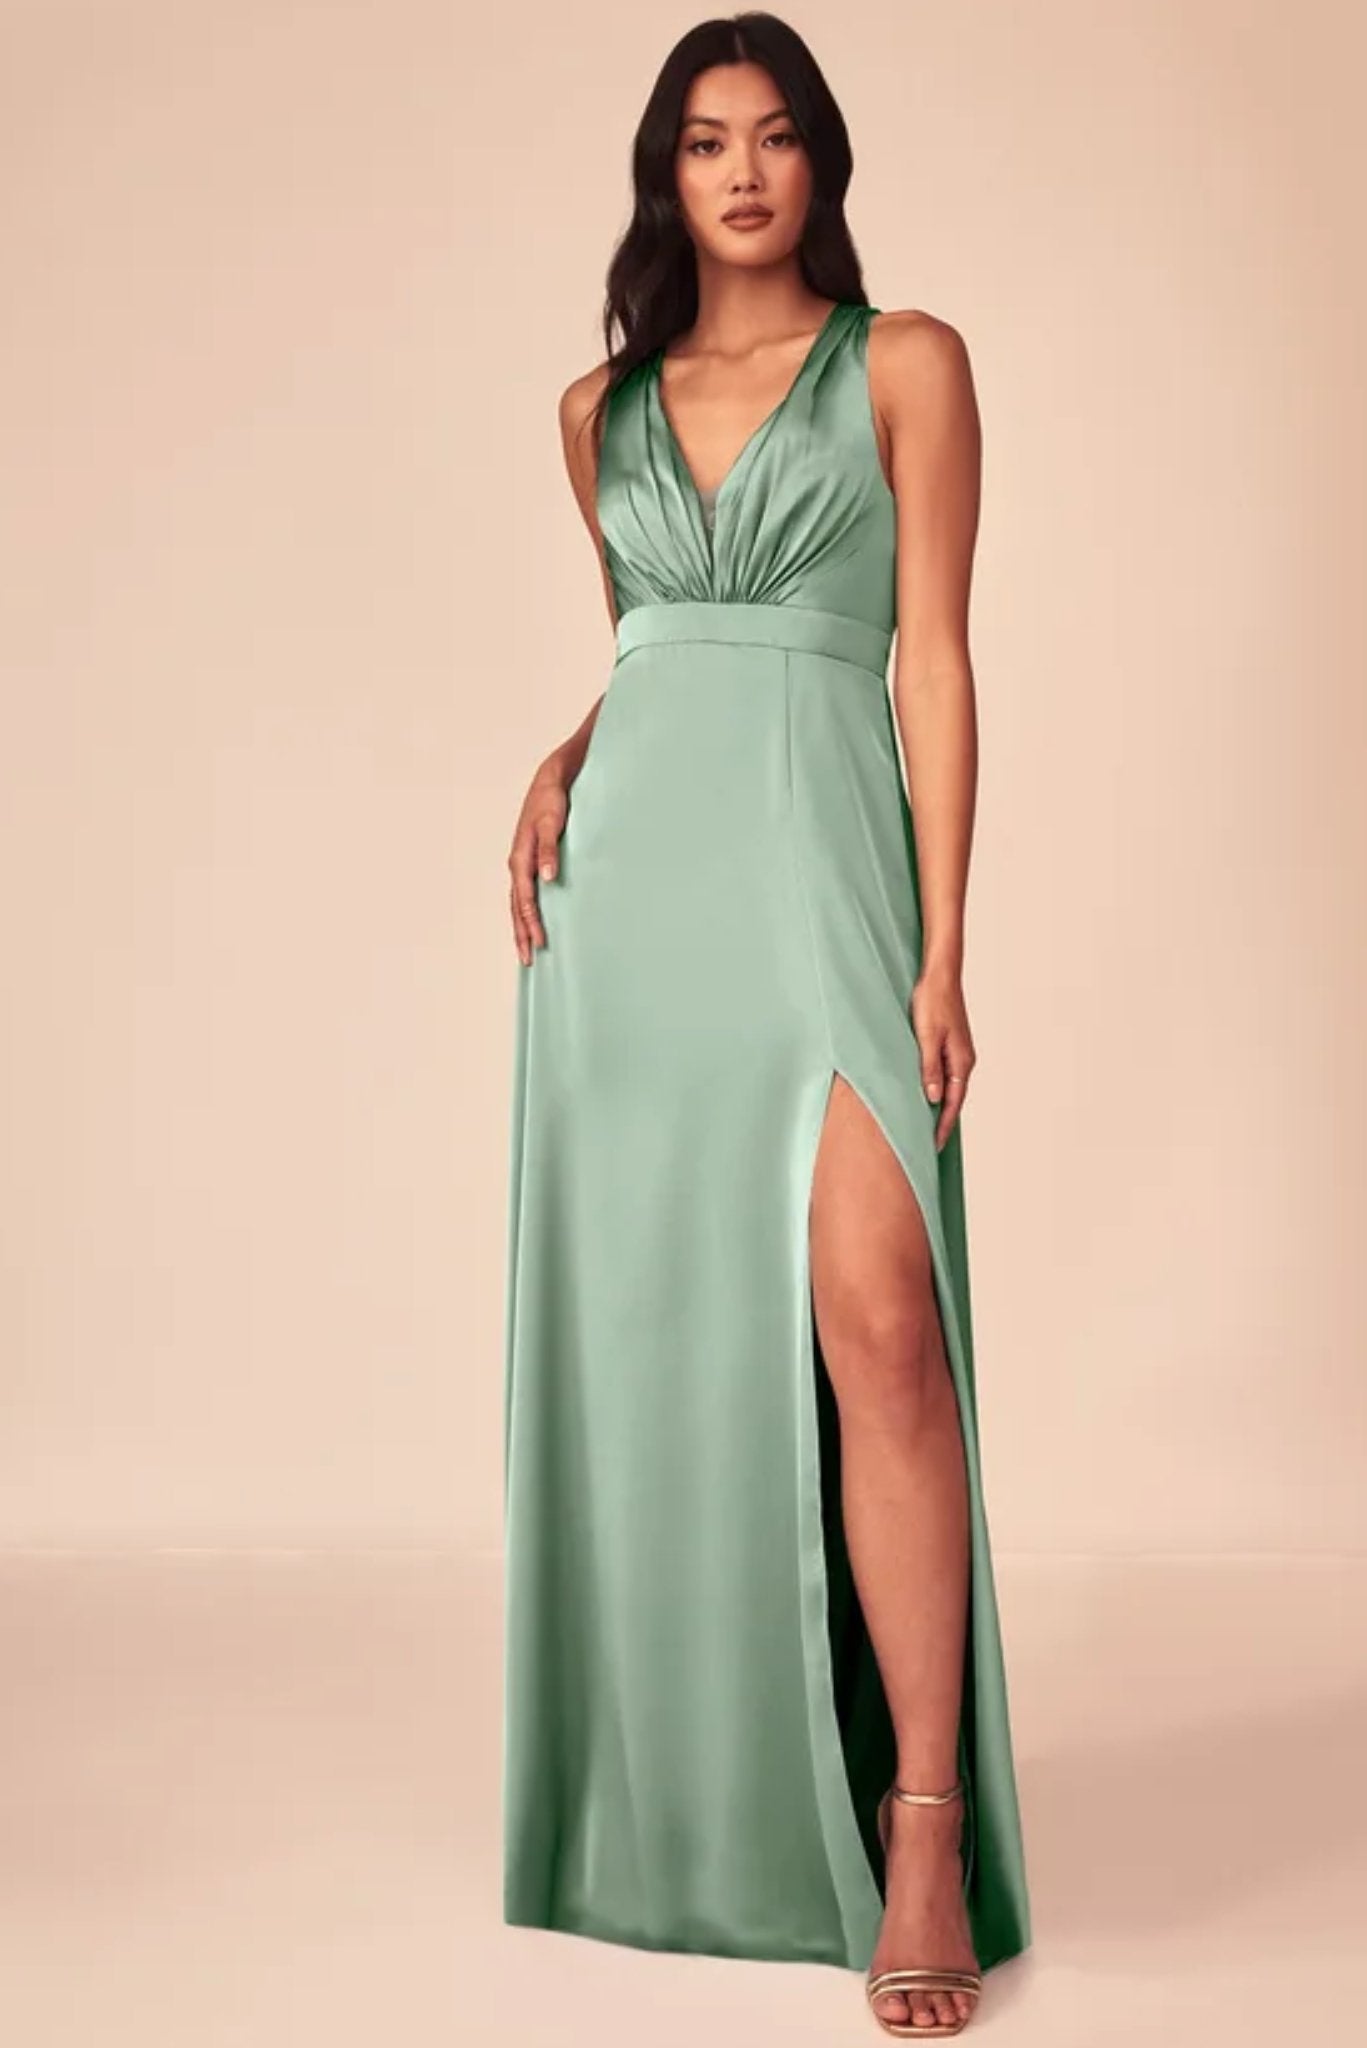 Satin Bridesmaid Dresses You'll Love - Pretty Collected